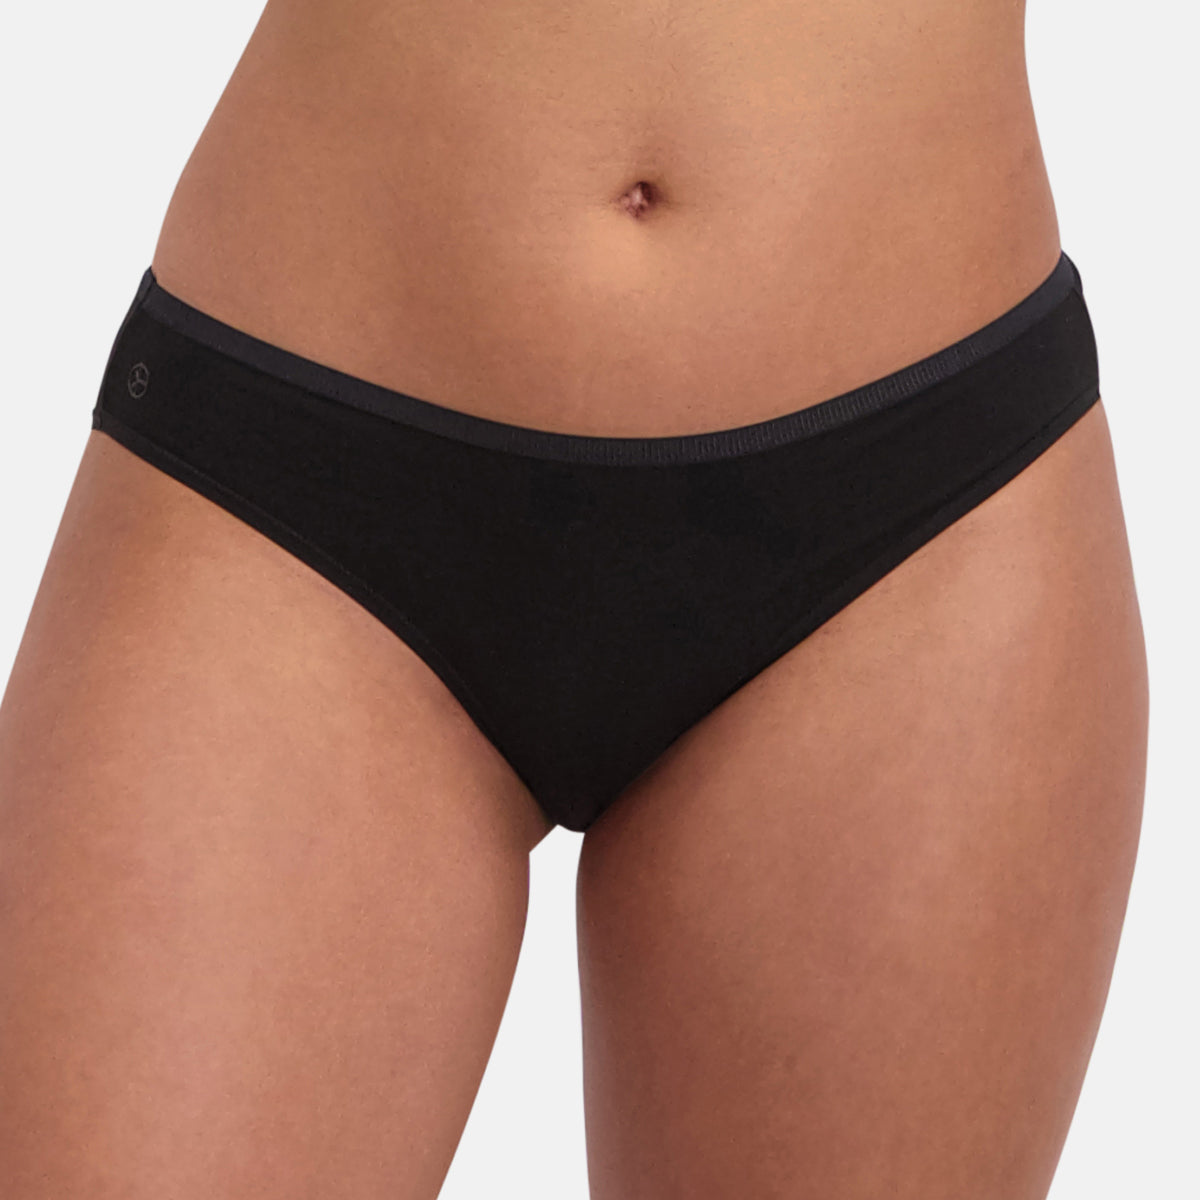 Bamboo Briefs (3 pack) by Bamboo Basics